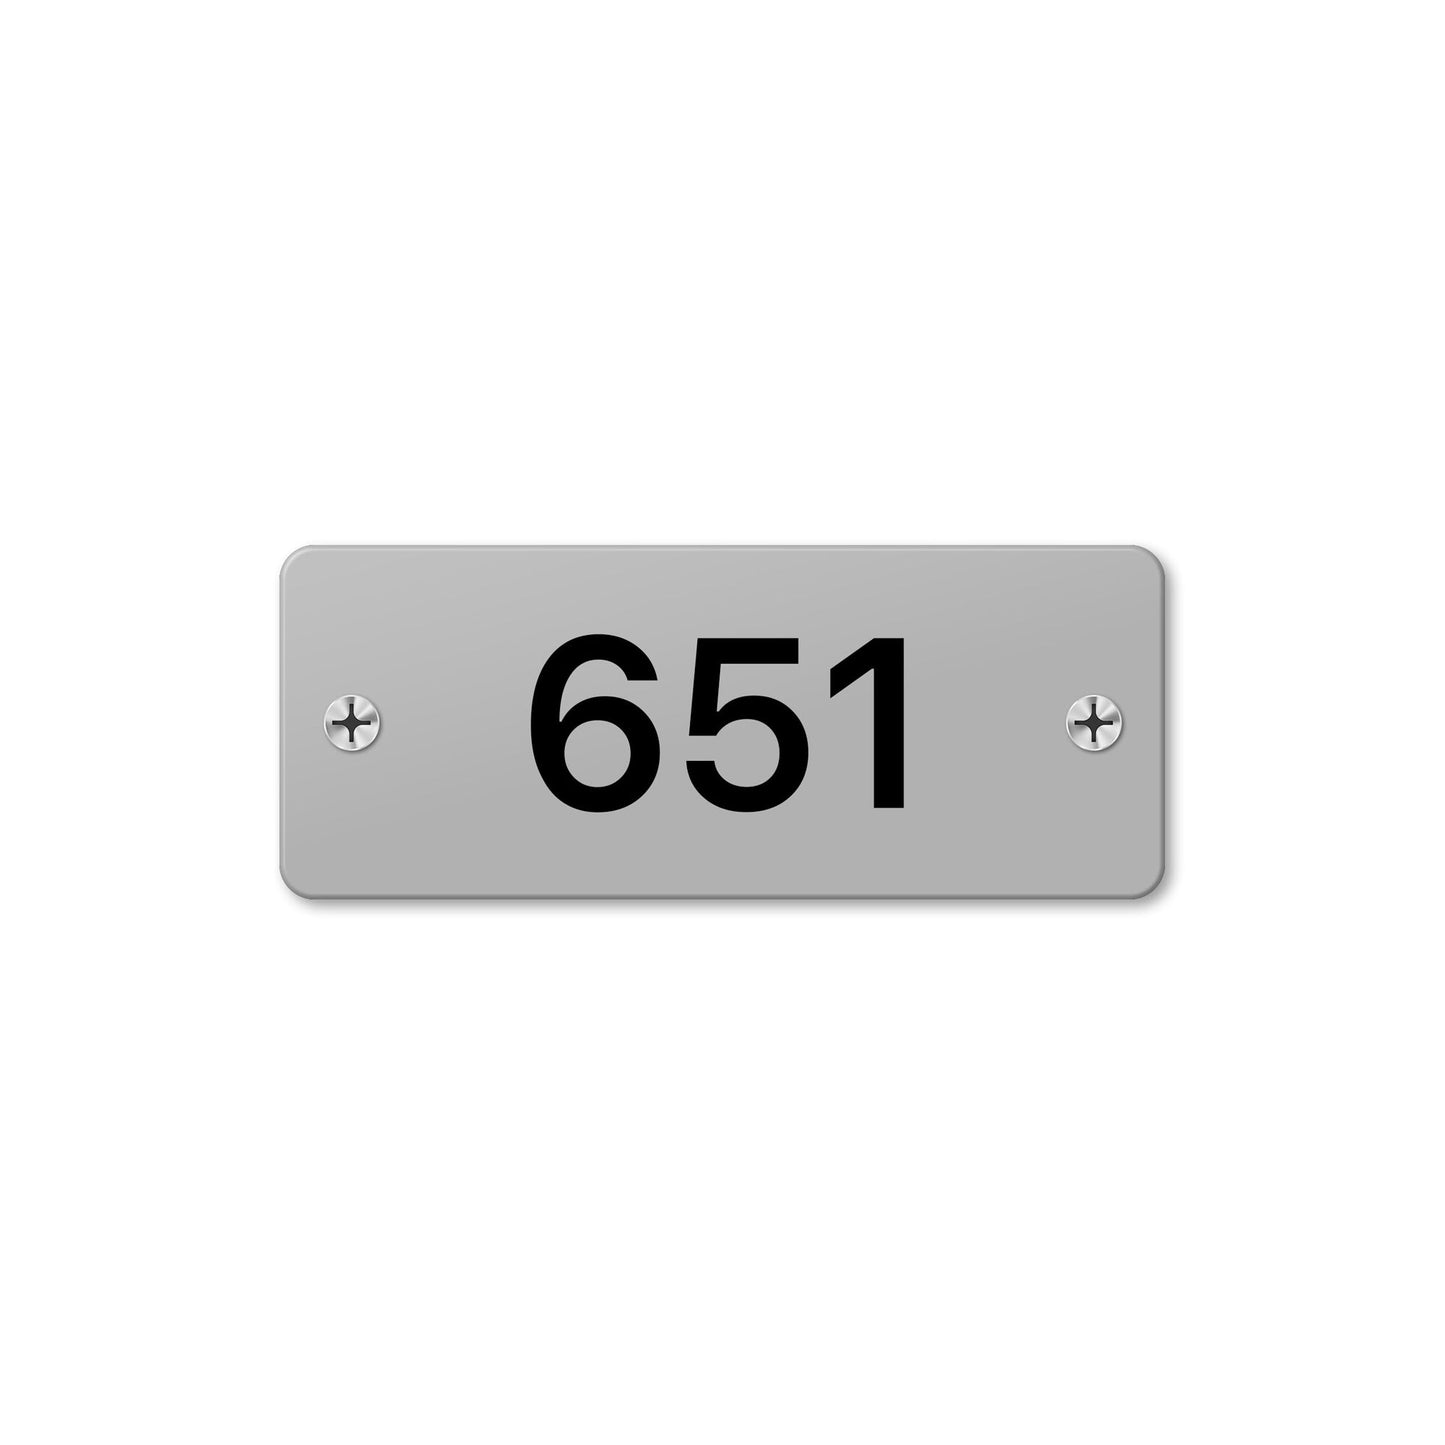 Numeral 651